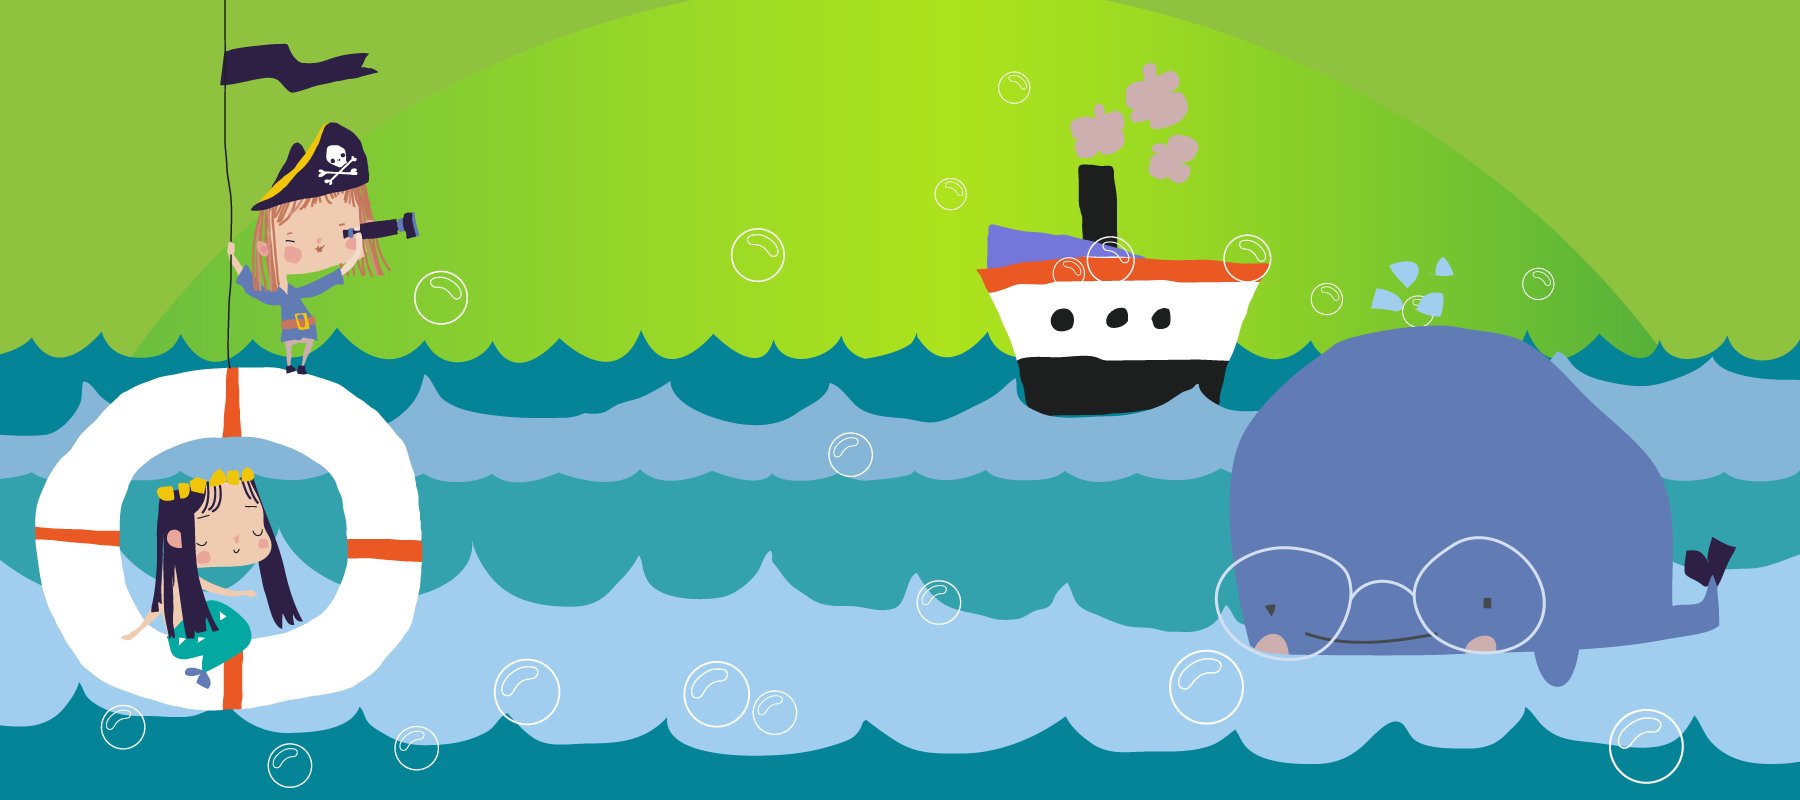 Illustration on a green background, a mermaid and a pirate watch a blue whale with a ship in the background